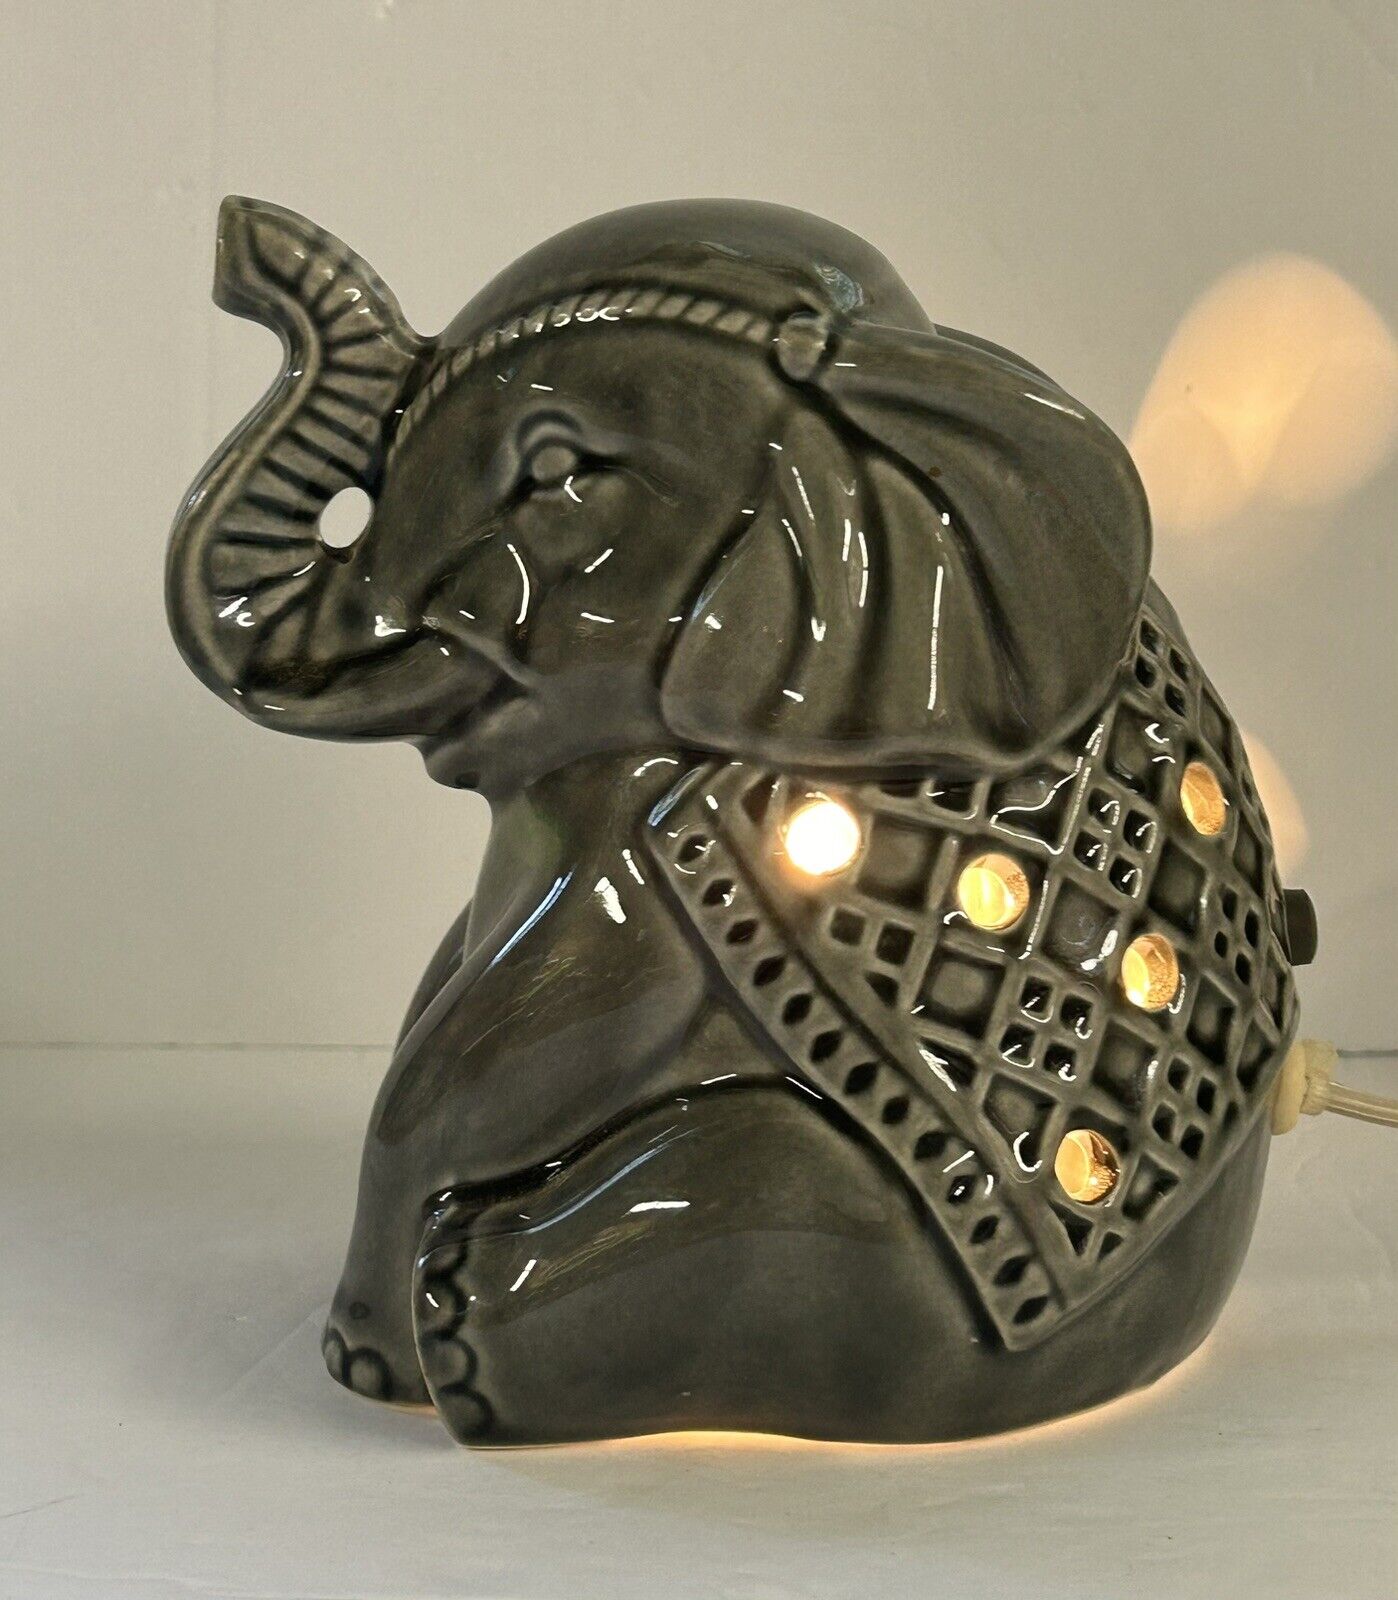 Ceramic Elephant Lucky Trunk Up Tabletop NightLight with On/Off Switch